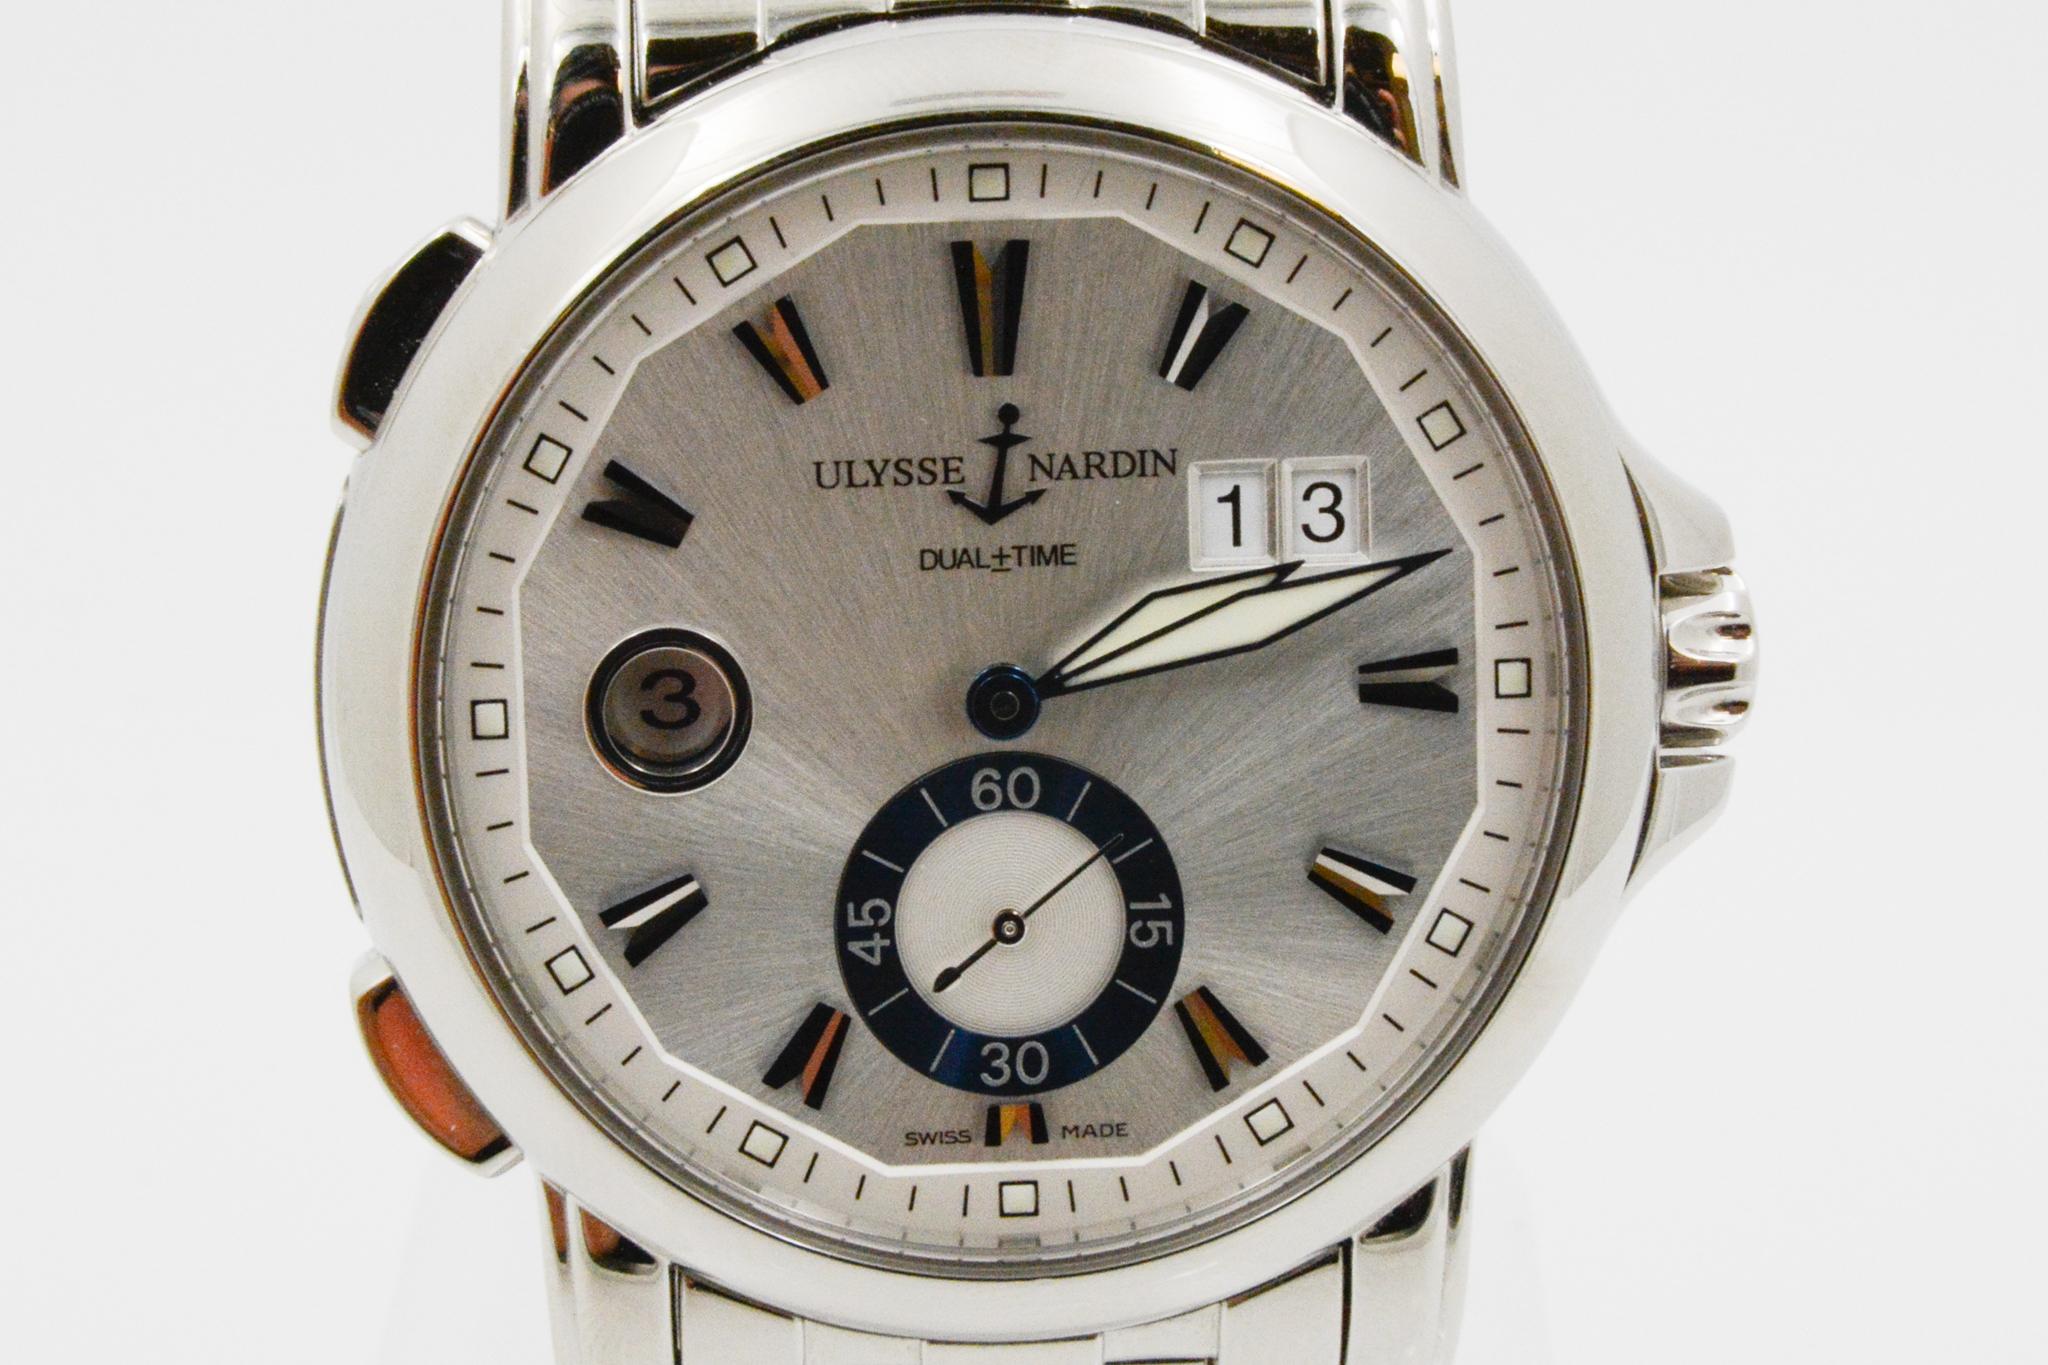 This CPO circa 2007 Ulysse Nardin Dualtime 40mm watch has a silver dial with blue index markers. It also has month and day window and a second hand subdial. The watch has a five row bracelet and automatic movement. Model: 243-55

